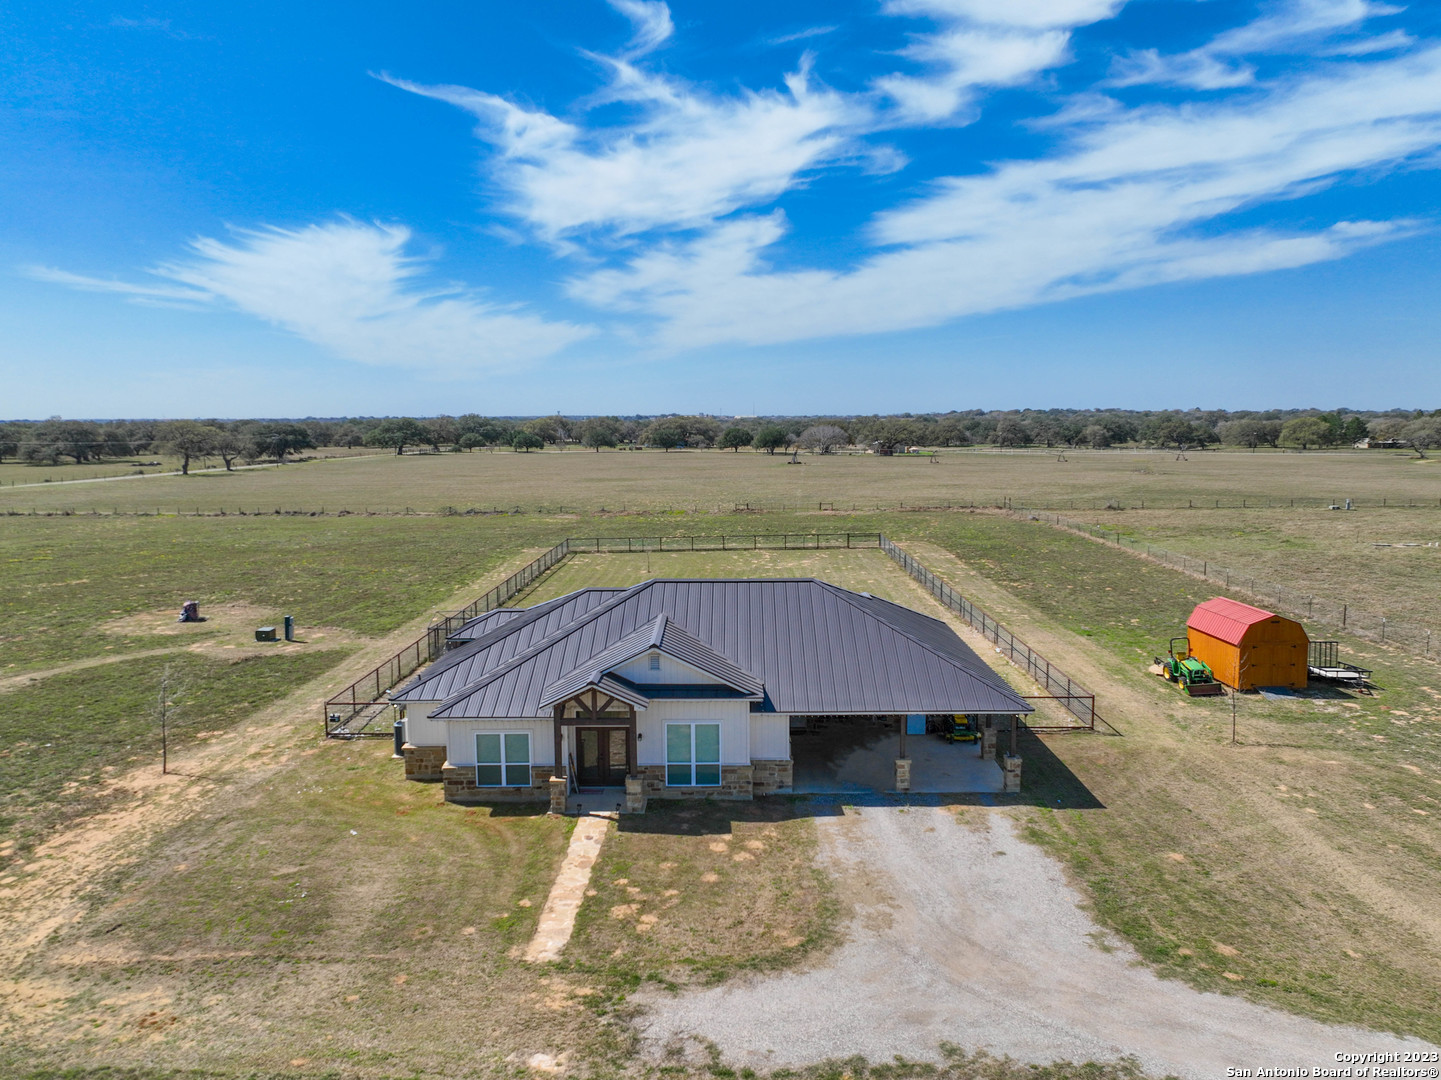 This 15 acre Atascosa County homestead is exactly what you've been looking for! This property features a 1901 square foot custom 4 bedroom and 2 bathroom home with secluded yet convenient access to Pleasanton, San Antonio as well as easy access to multiple major highways. The inside of the home features an open layout that is filled with excellent natural lighting and a split master bedroom floorplan. Raised ceilings are throughout the home along with Quartzite custom countertops in the kitchen and in the bathrooms. Behind the home features a metal fenced in back yard and a large 29'X8' back patio perfect for views of the surrounding countryside. The property features 2 water wells, perimeter fencing, and underground electric to the home. This home is move in ready, you must see this one in person!